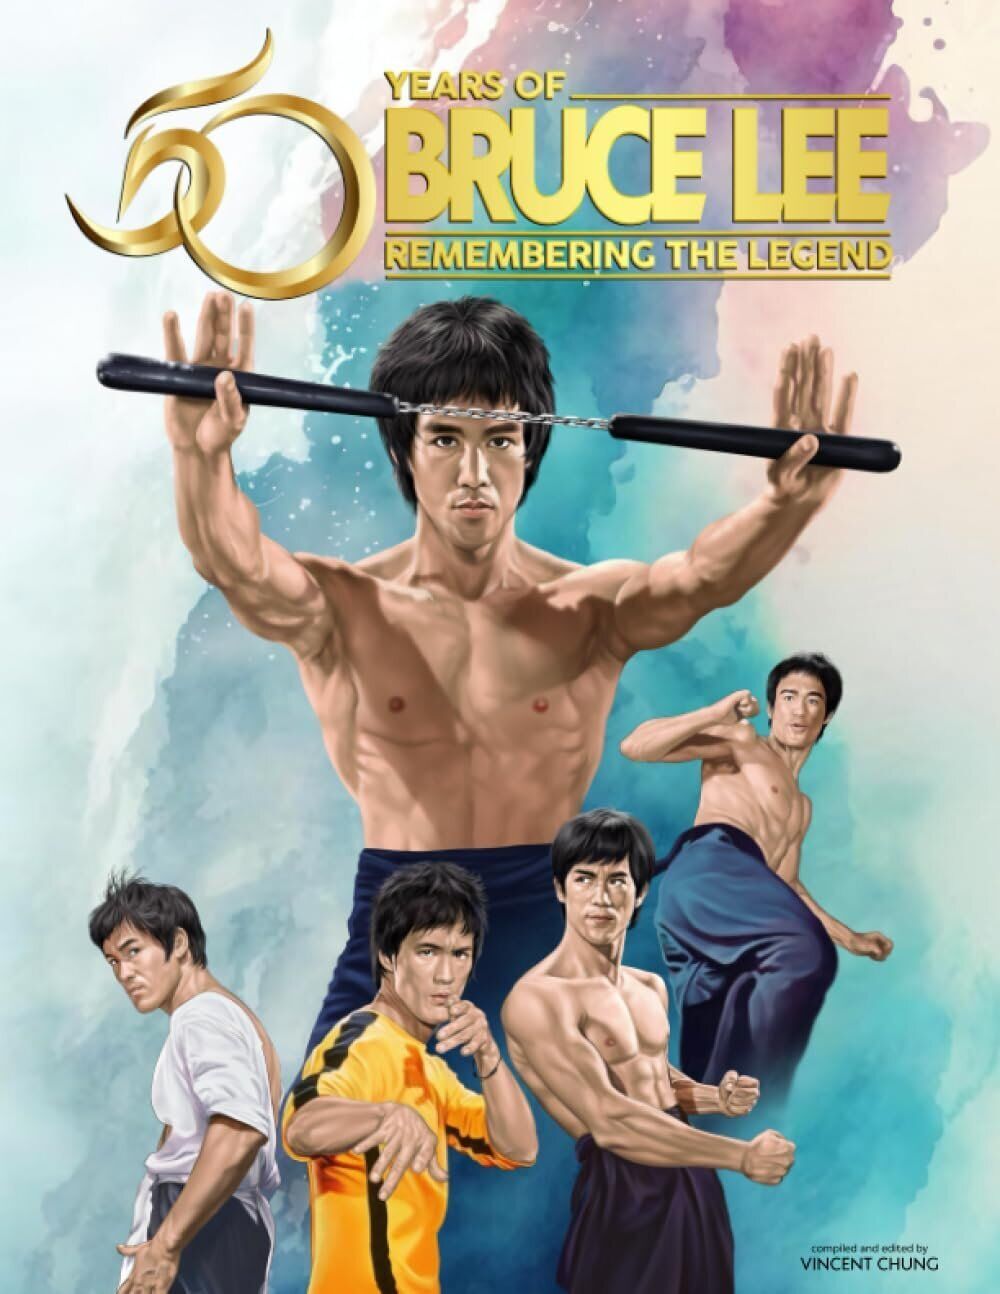 50 Years of Bruce Lee: Remembering the Legend